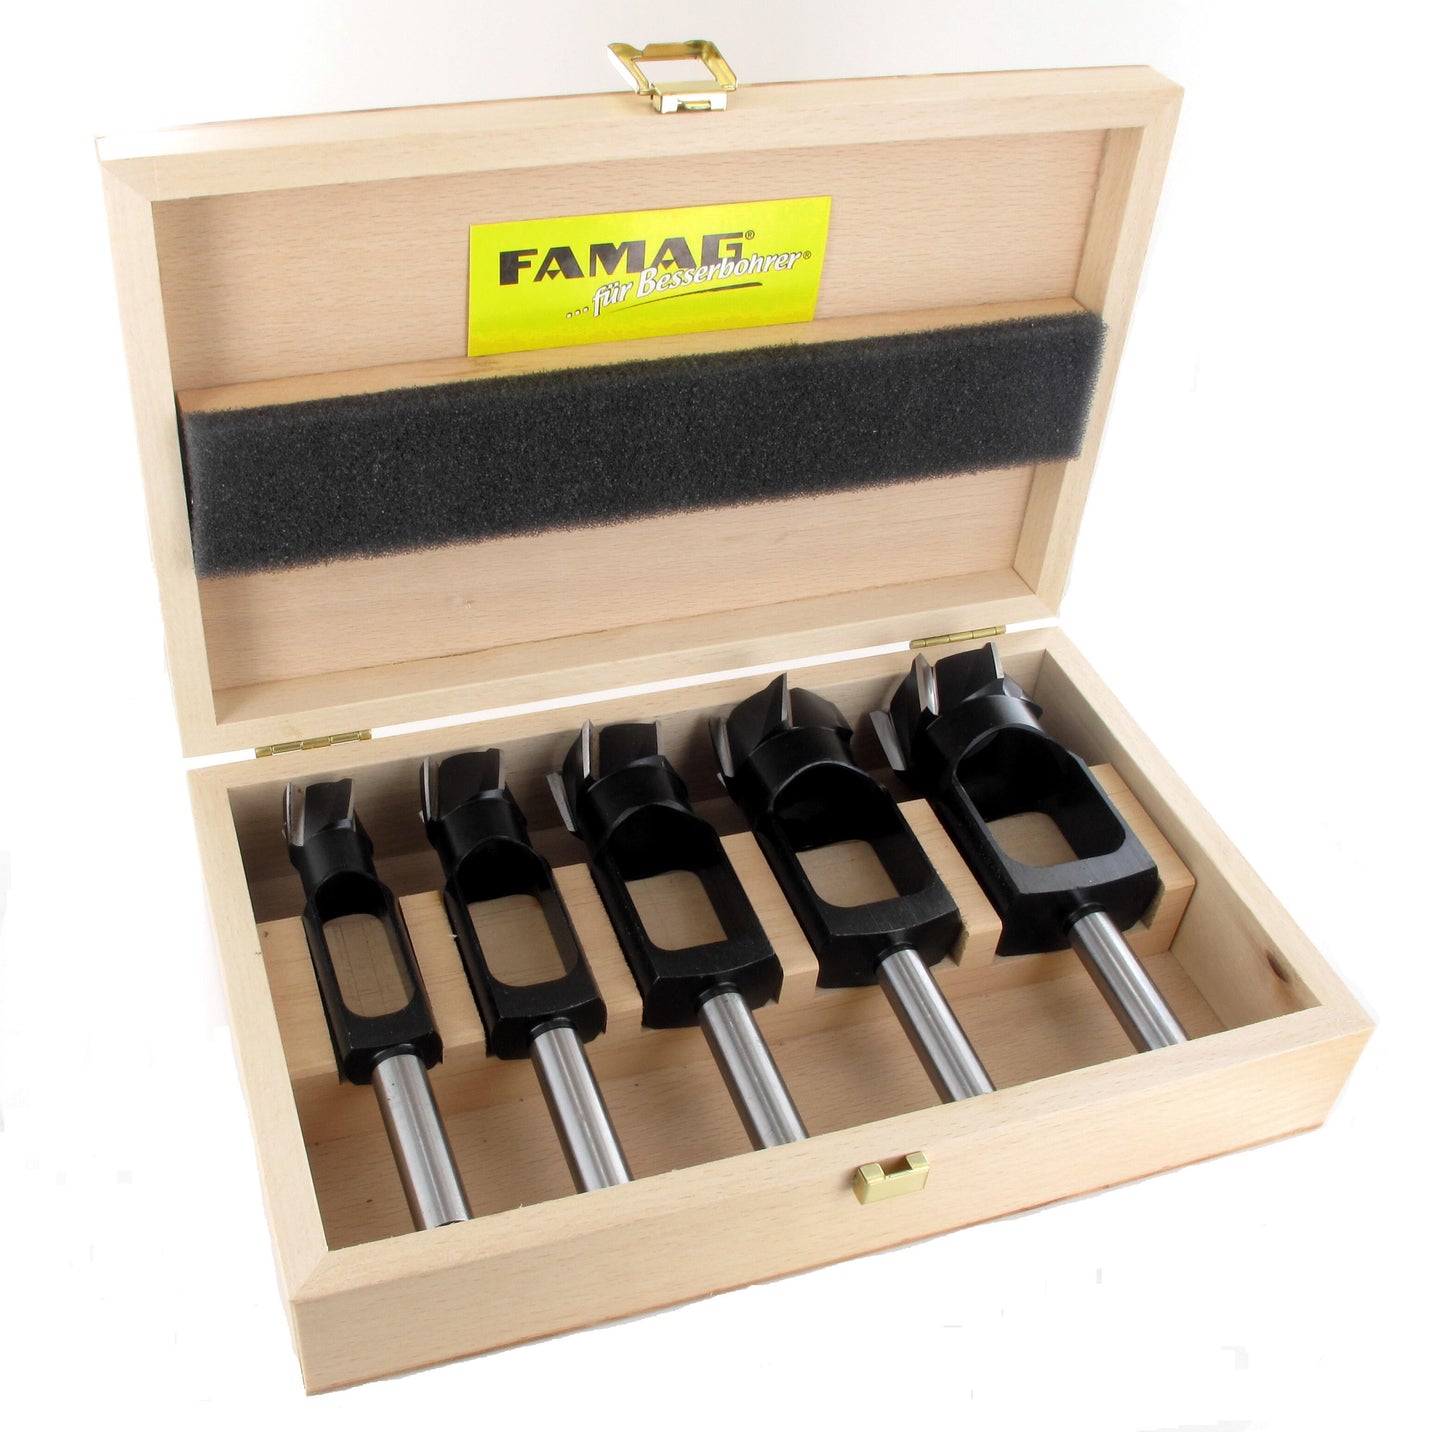 FAMAG 5pcs Disc and Plug Cutter Set in Wooden Box, 1616505